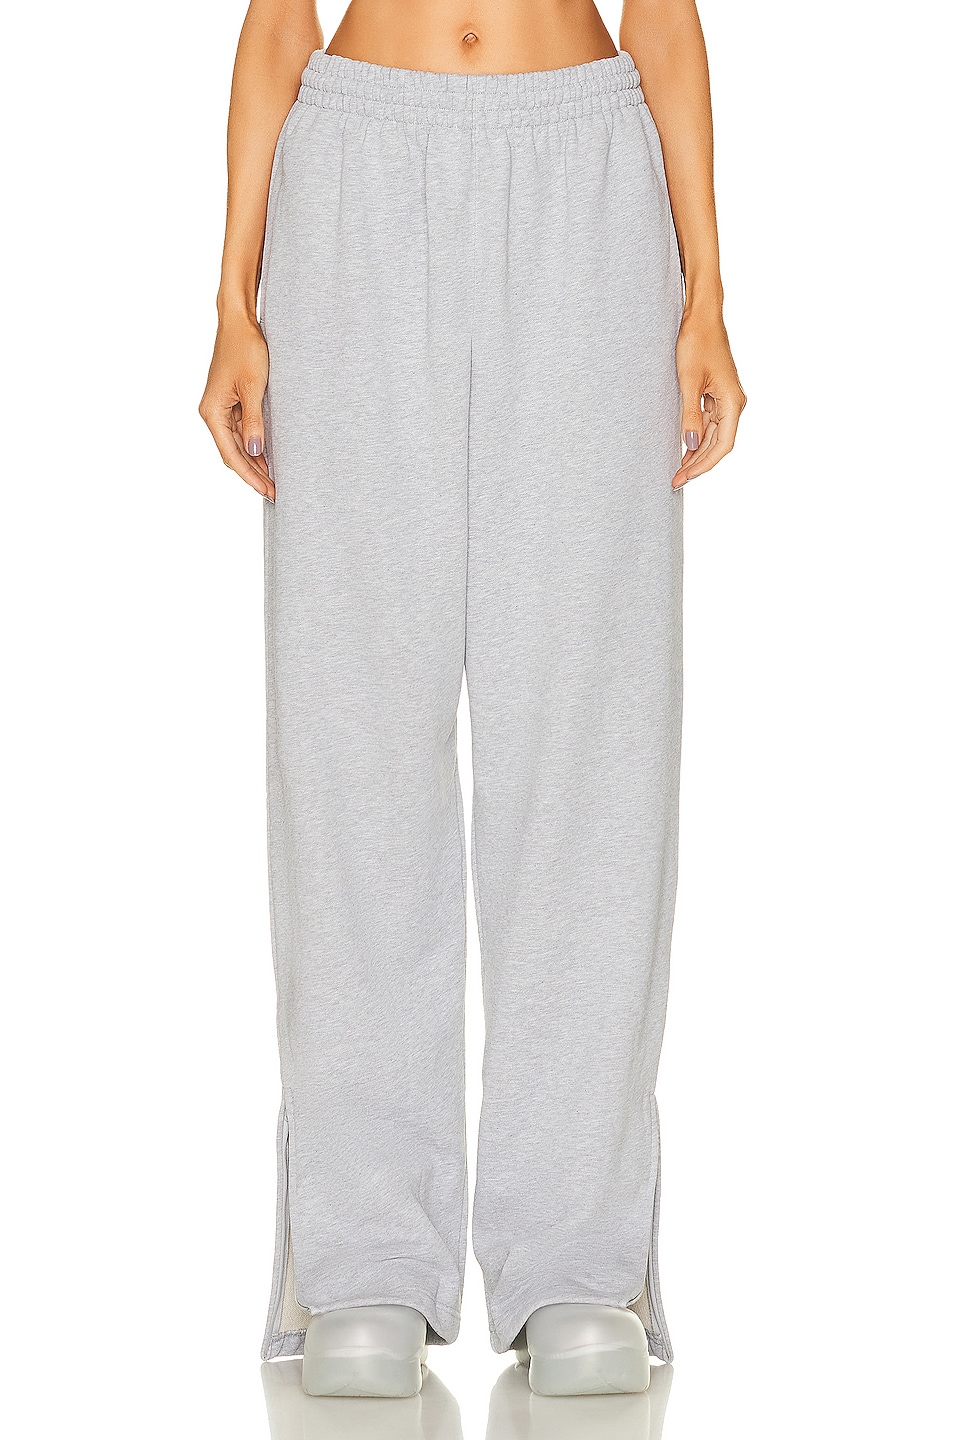 Image 1 of WARDROBE.NYC x Hailey Bieber HB Track Pant in Grey Marl